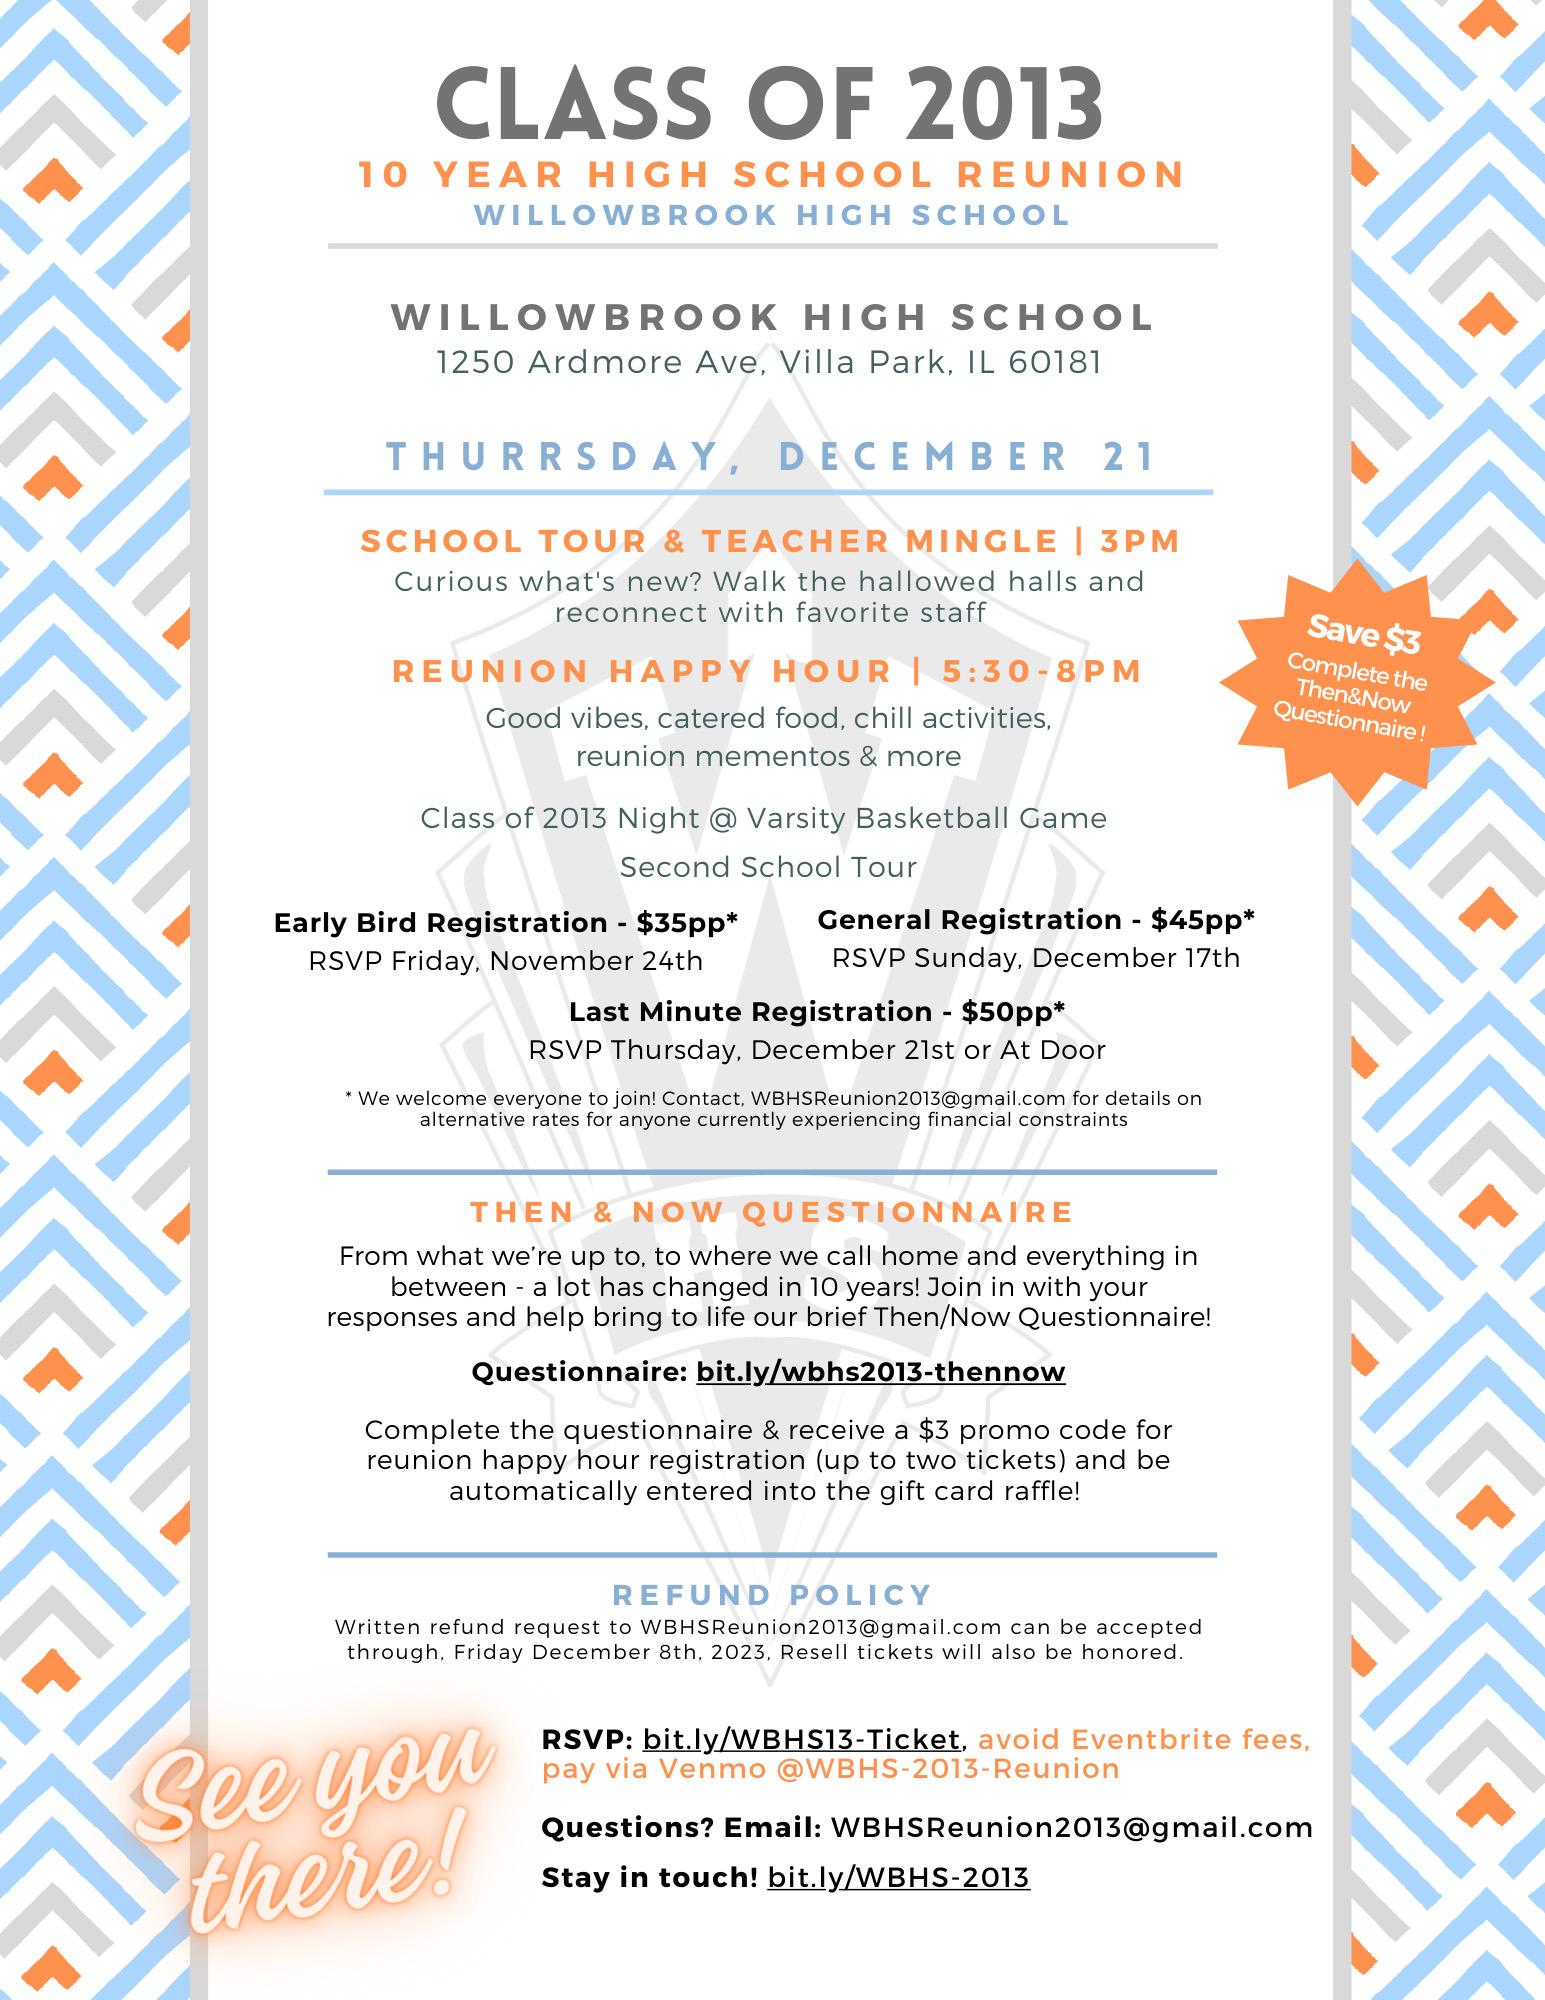 Save the date for the Willowbrook class of 2013 10-year reunion 